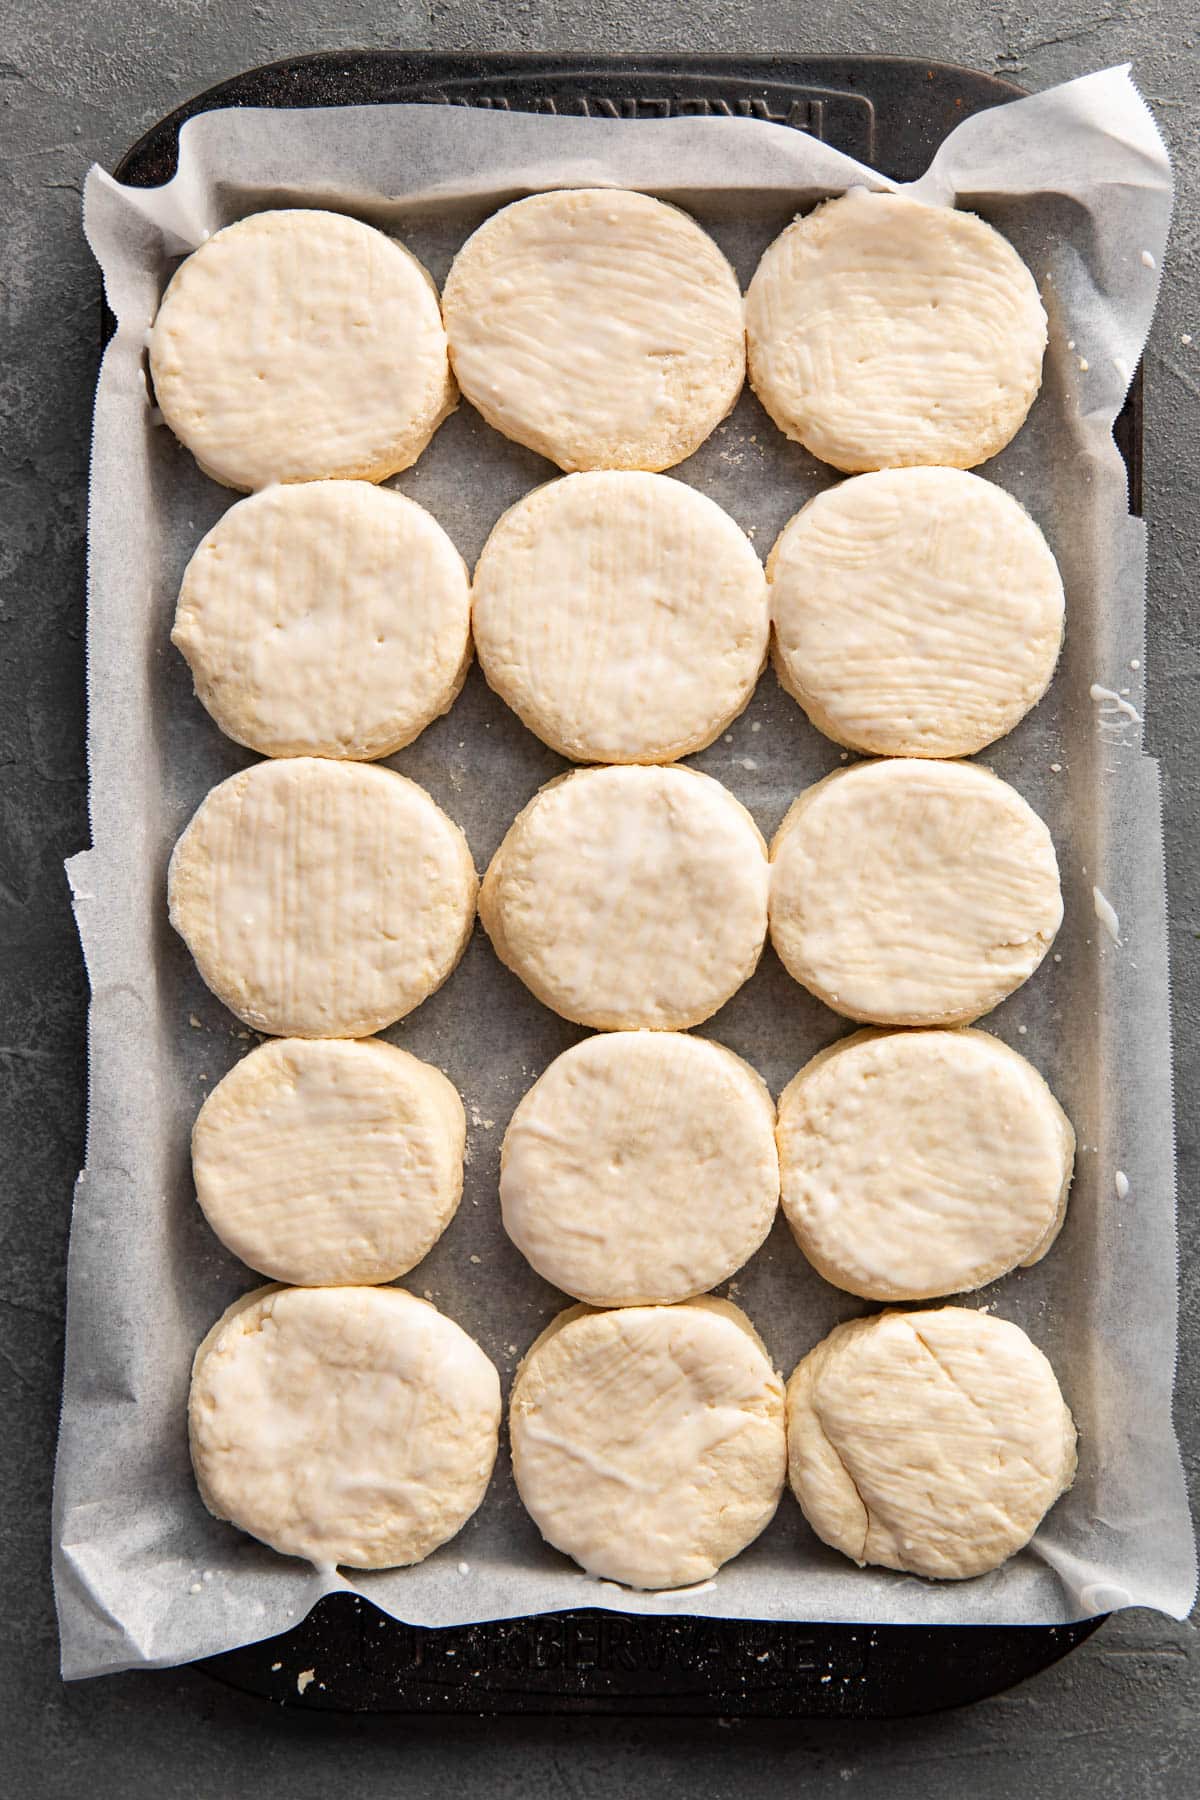 biscuits in a pan before baking